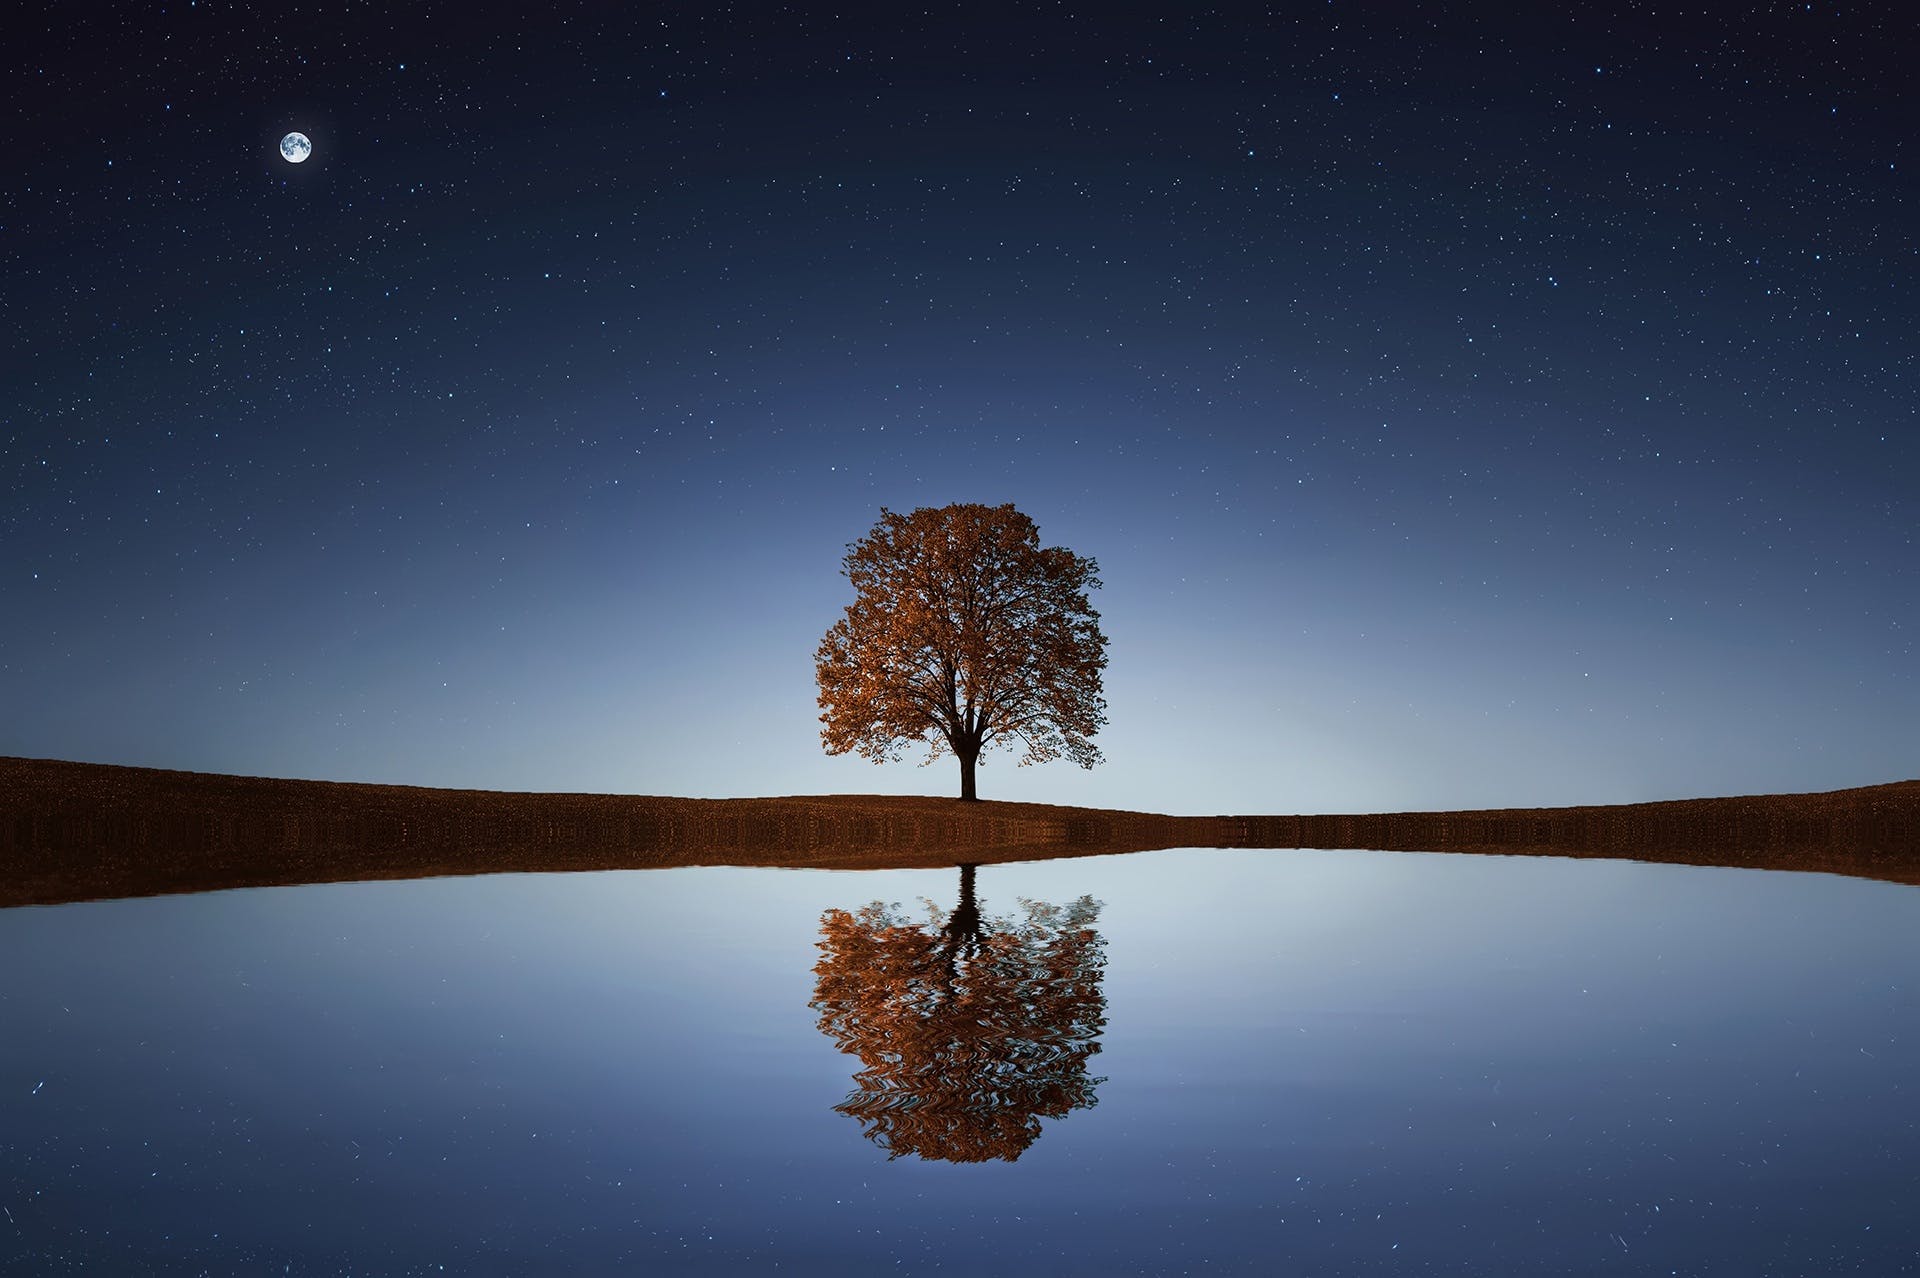 A lone tree on a starry night, its reflection in a body of water below.